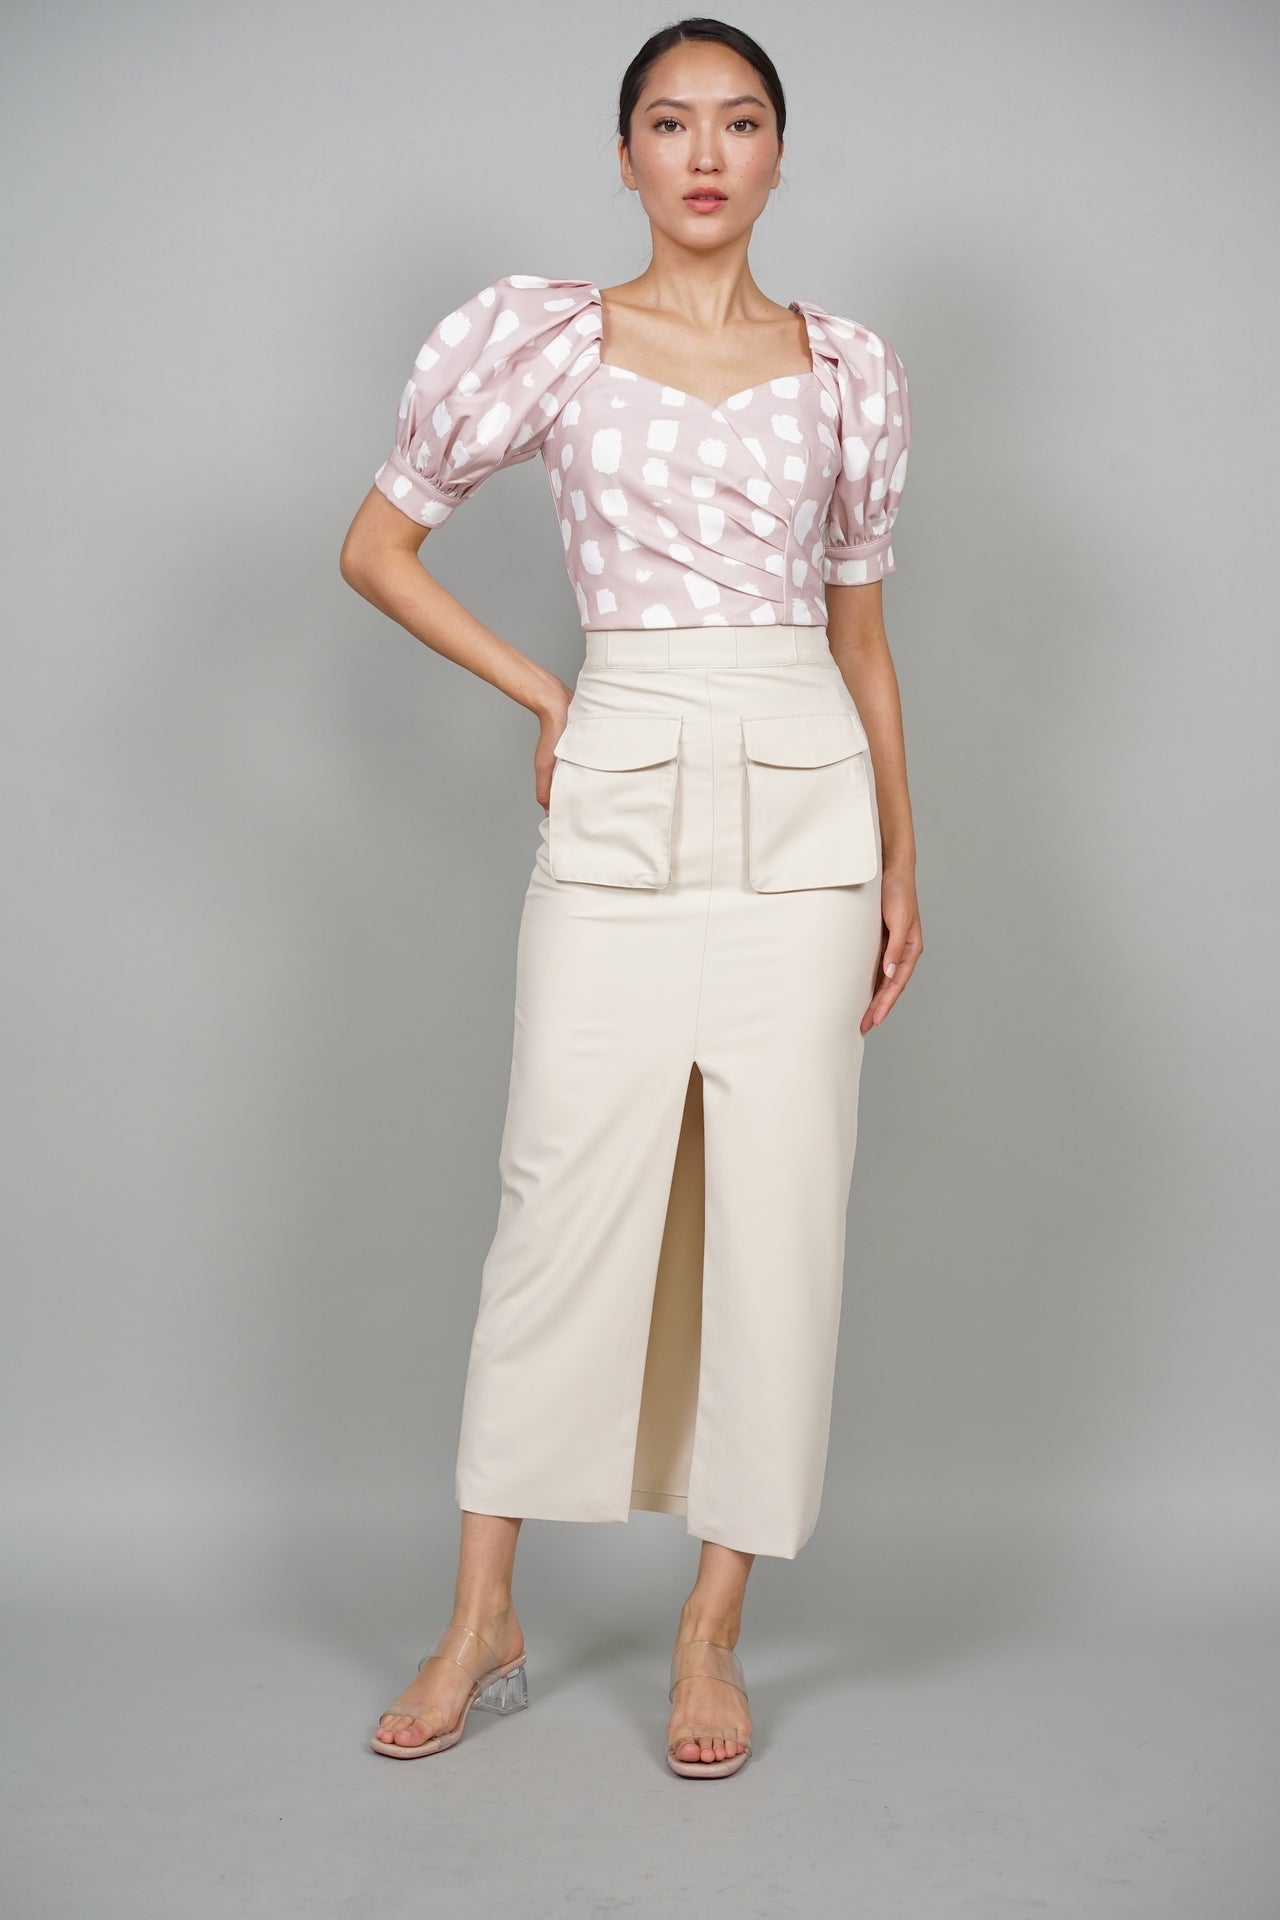 Vince Puffy Top in Nude Pink Abstract